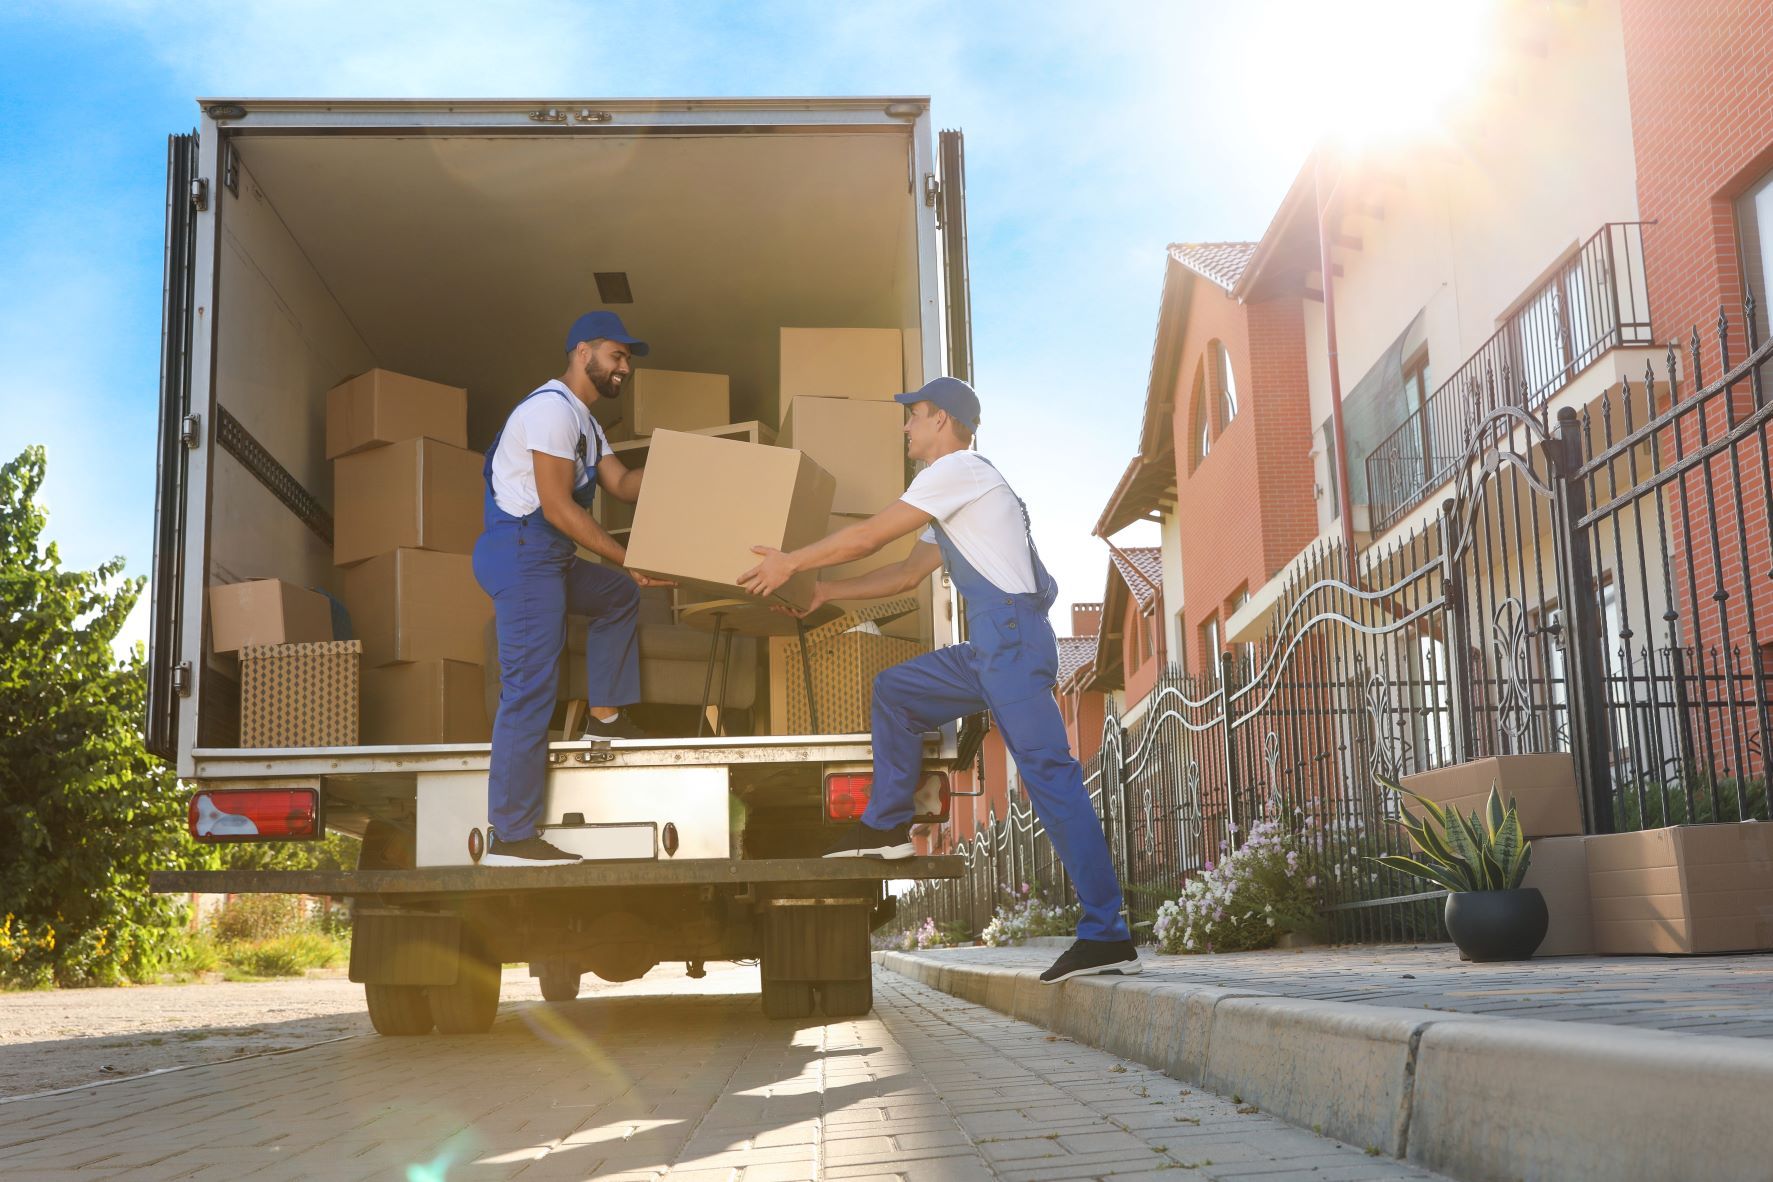 6 Important Factors You Should Consider When Hiring a Moving Company